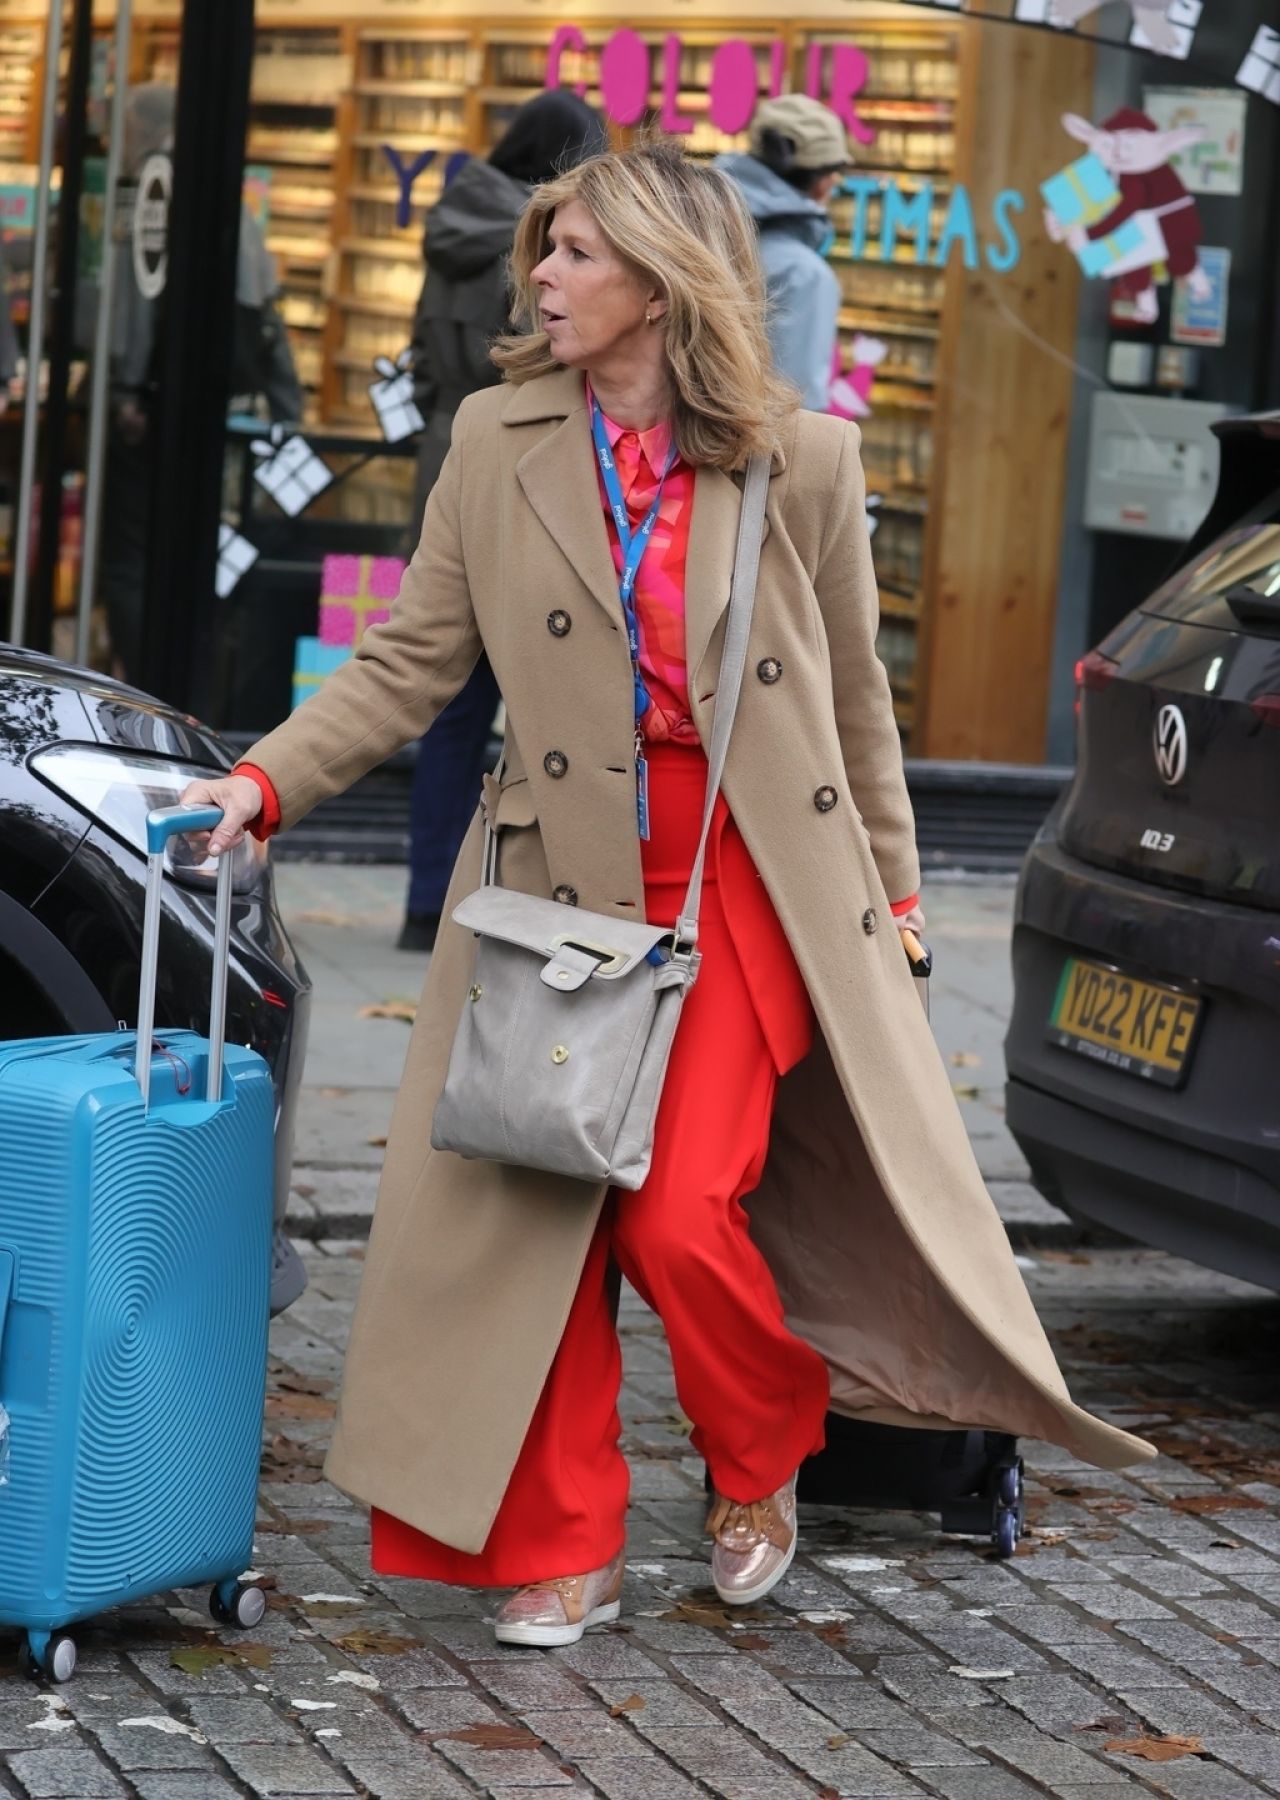 Kate Garraway Wearing Bright Red Flared Trousers and Bright Top ...